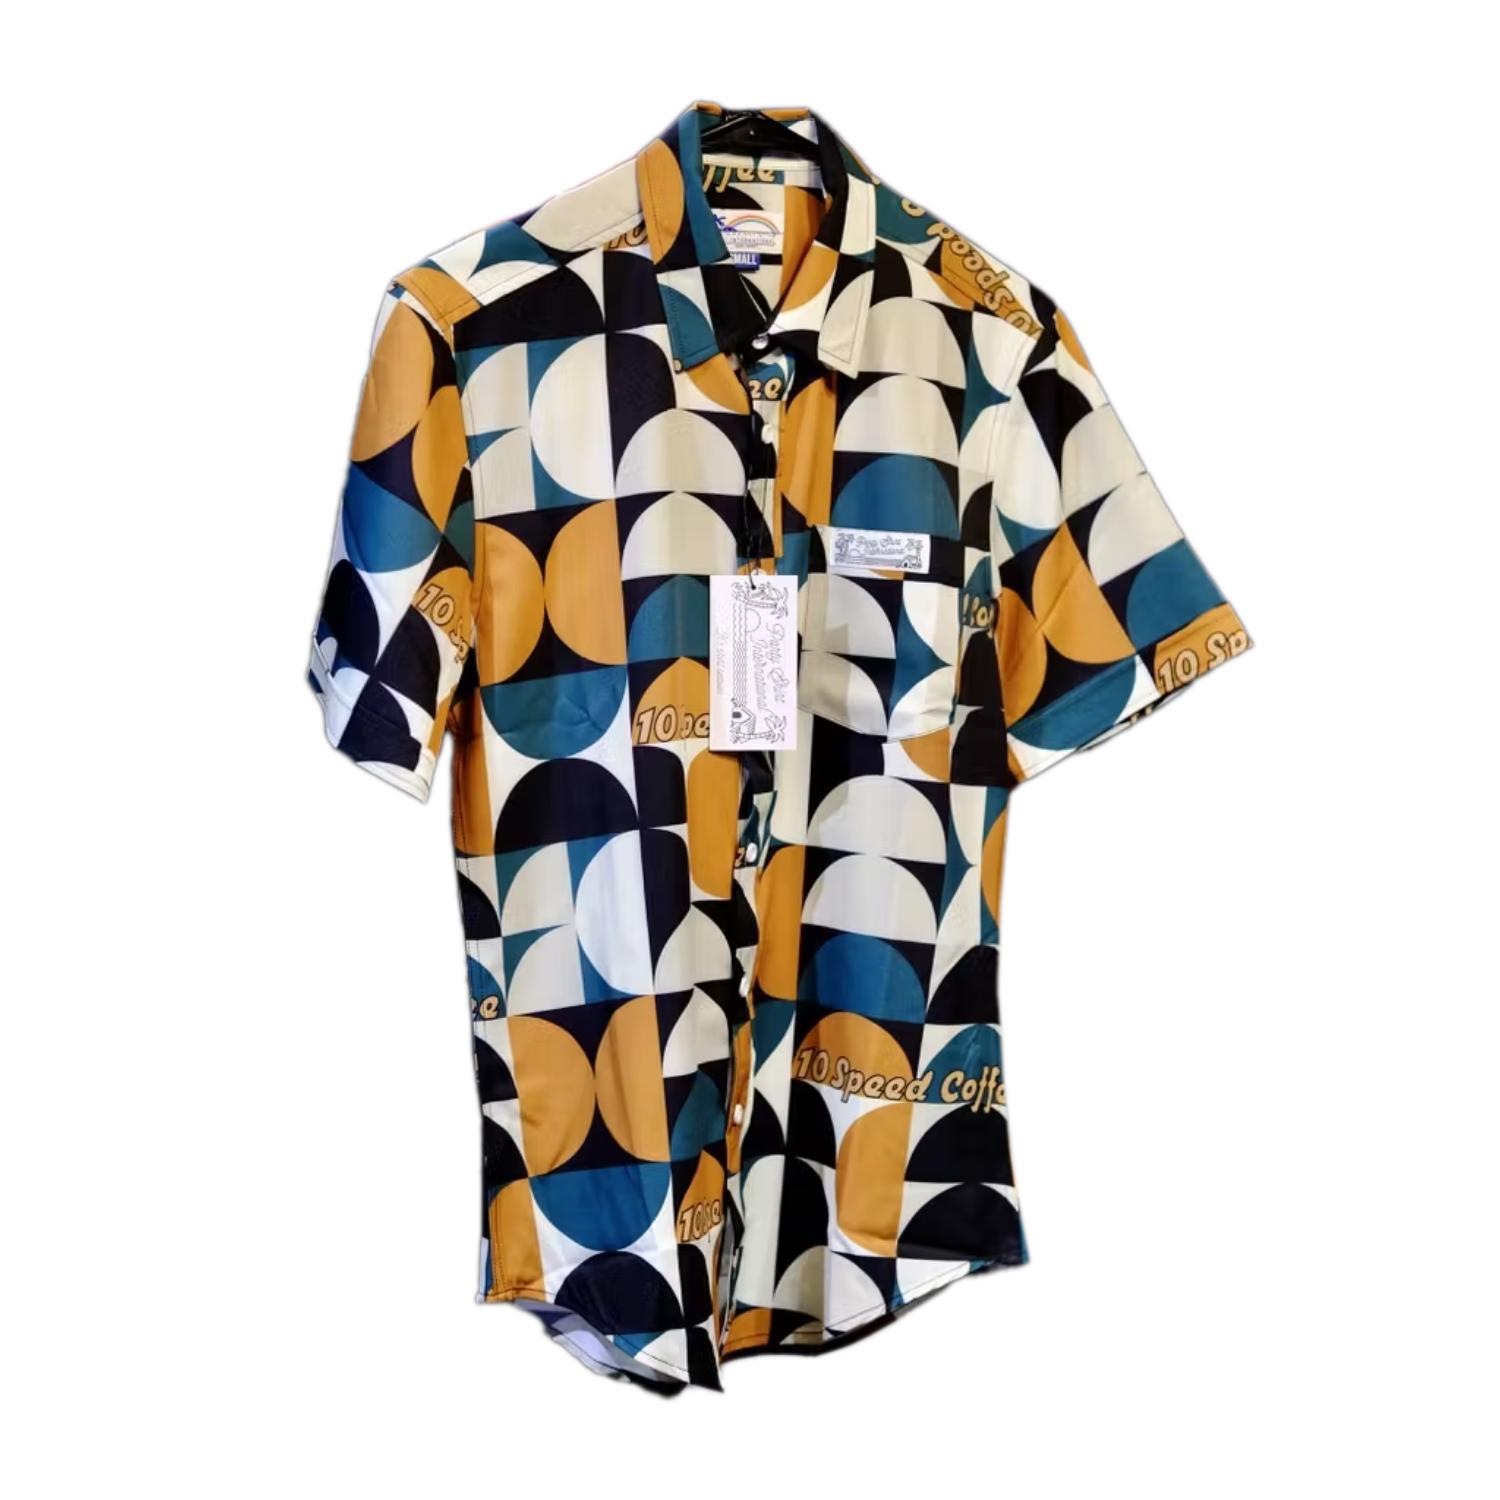 Party Shirt with custom pattern design and 10 Speed logo